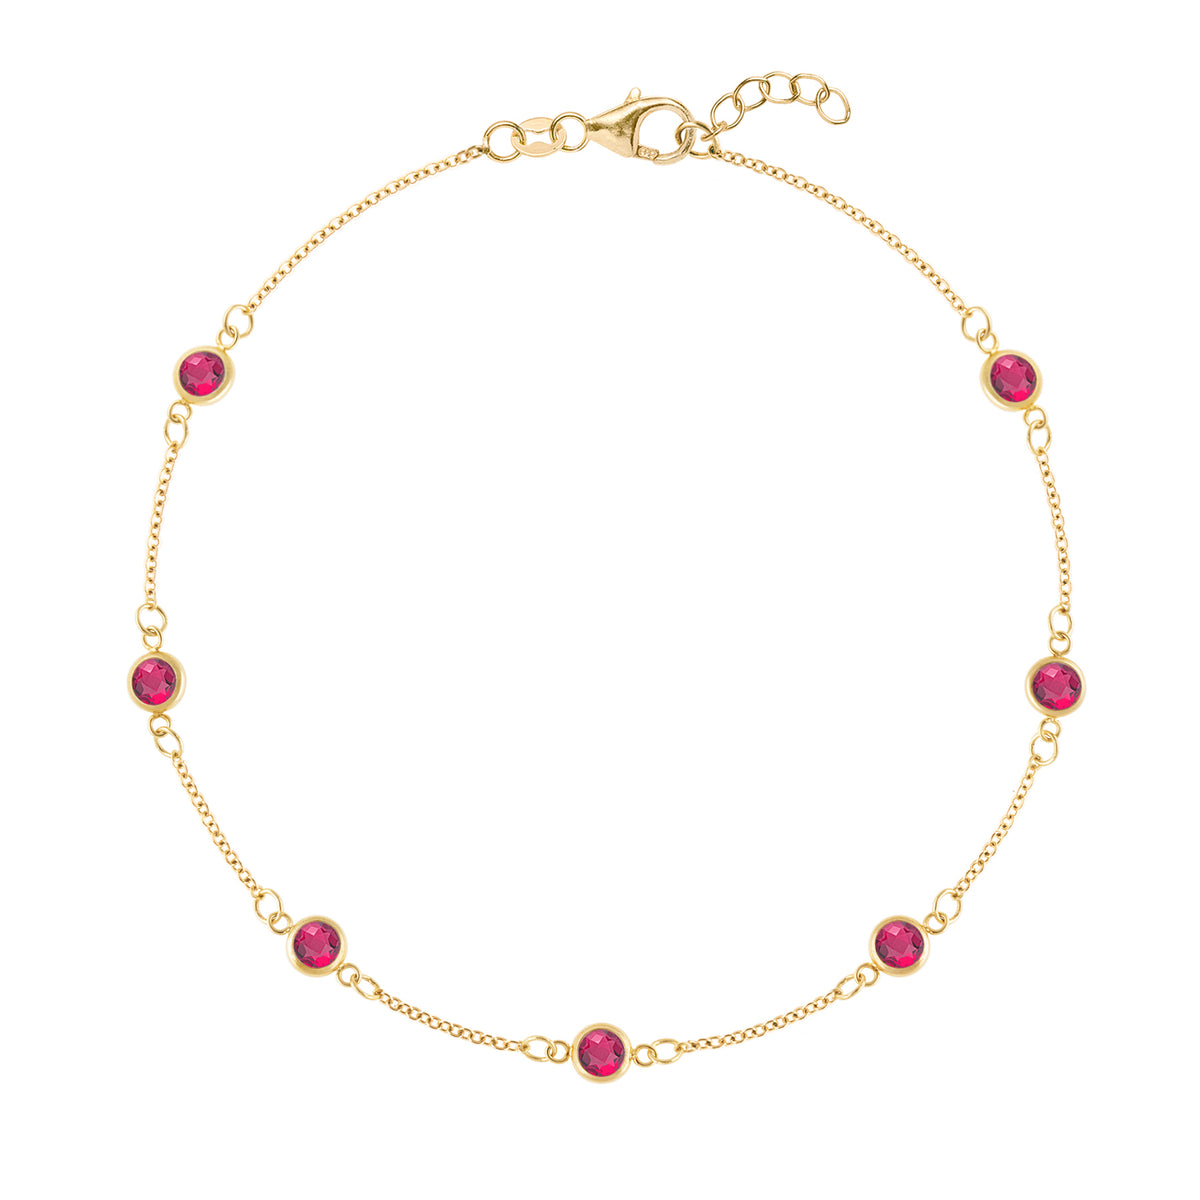 TANISHQ 22KT Gold Ruby and Emerald Bangle 45 x 55 mm in Tirupati at best  price by Kpc Old Gold Purchase Store - Justdial